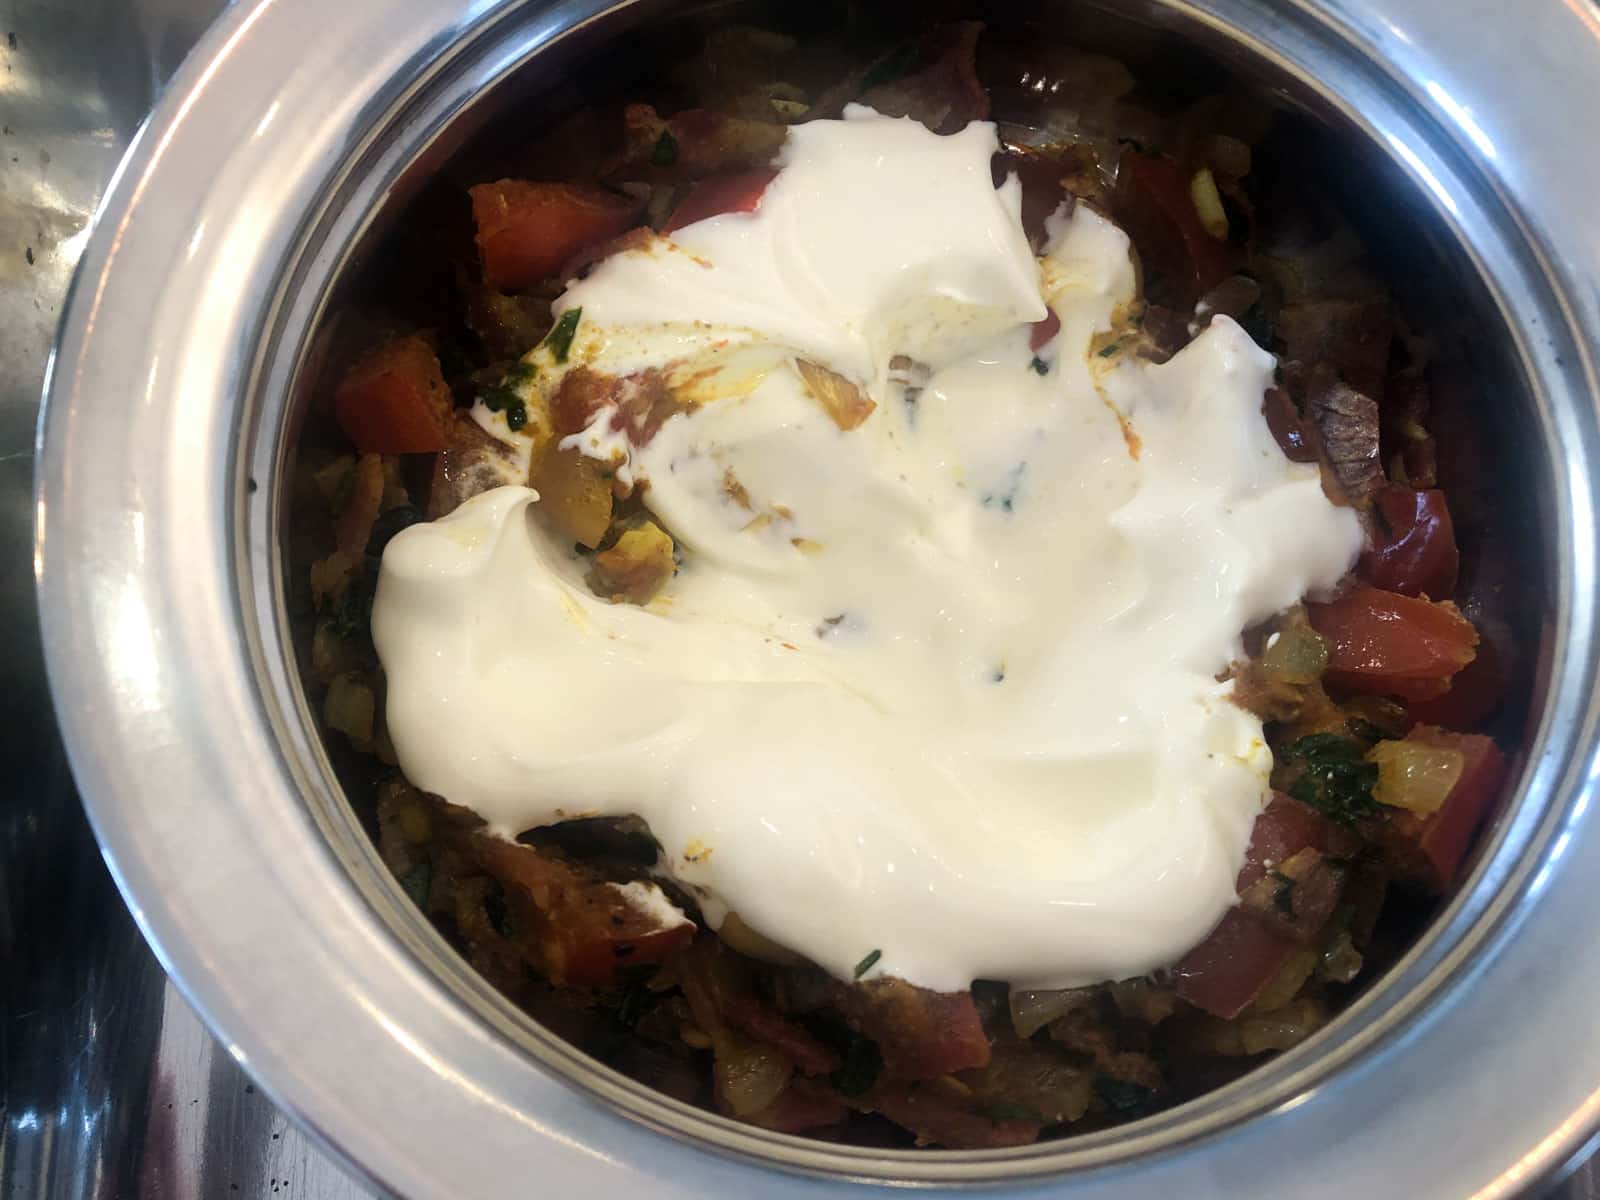 Curried vegetables topped with a large sppon of yogurt in a metal baking dish.